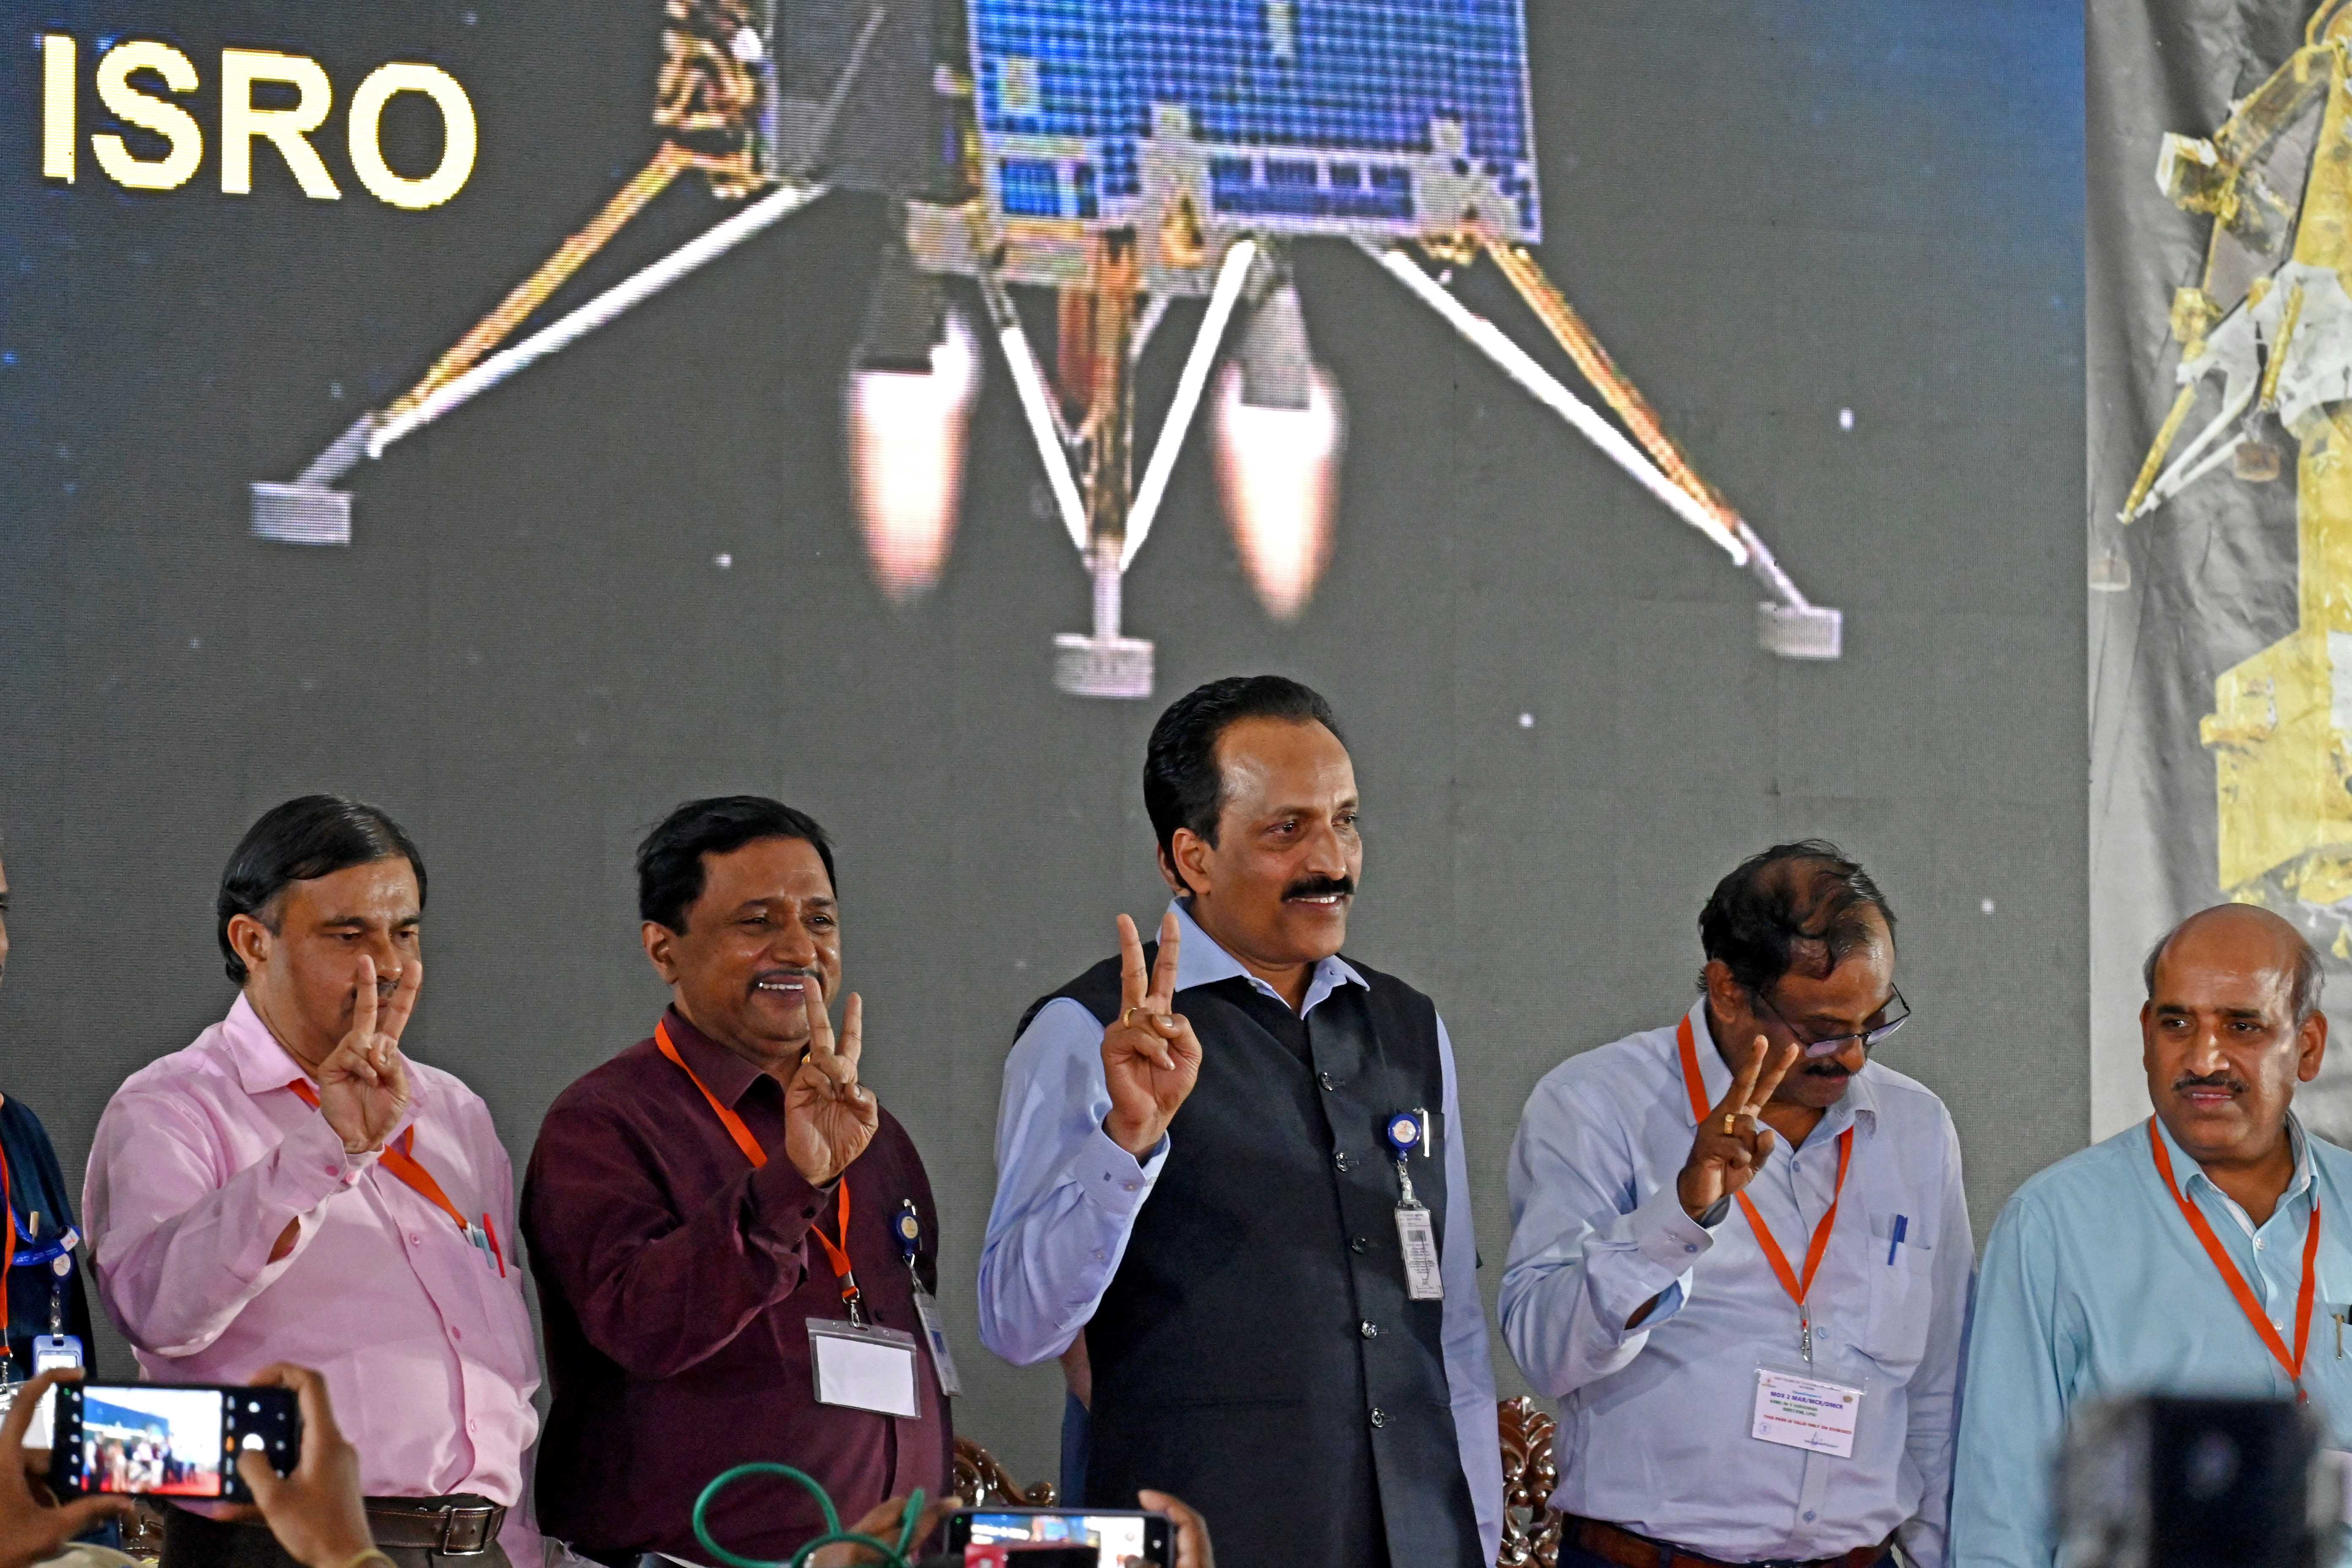 Chandrayaan-3 on the Moon: A GIANT LEAP FORWARD FOR INDIA